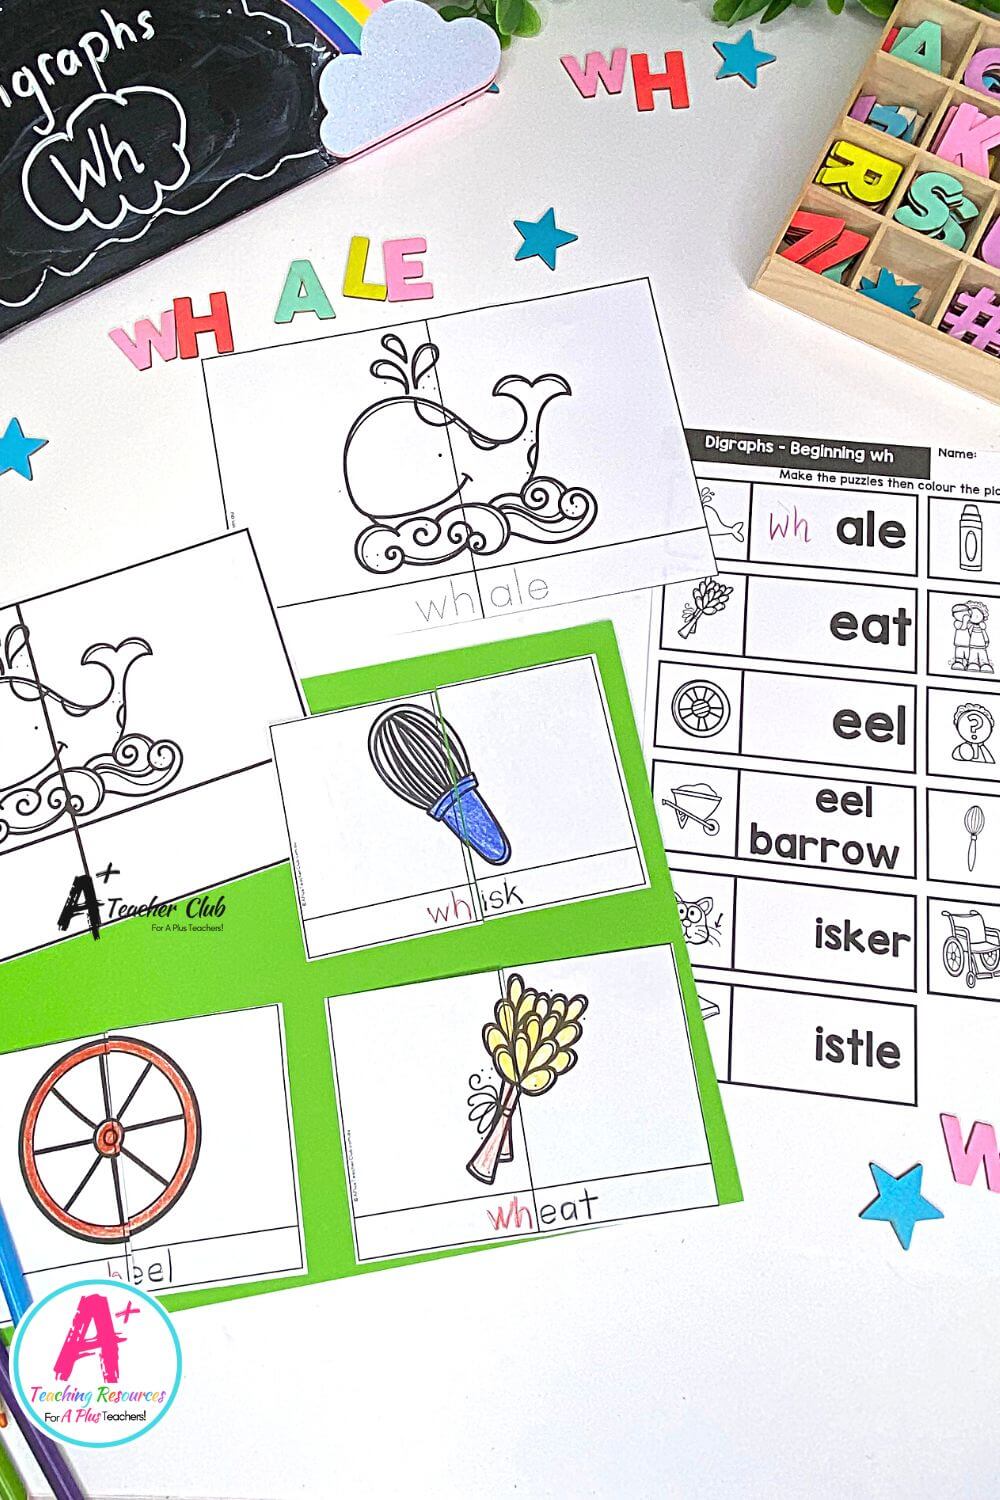 Initial wh Digraph Activities 2 Piece B&W Puzzles